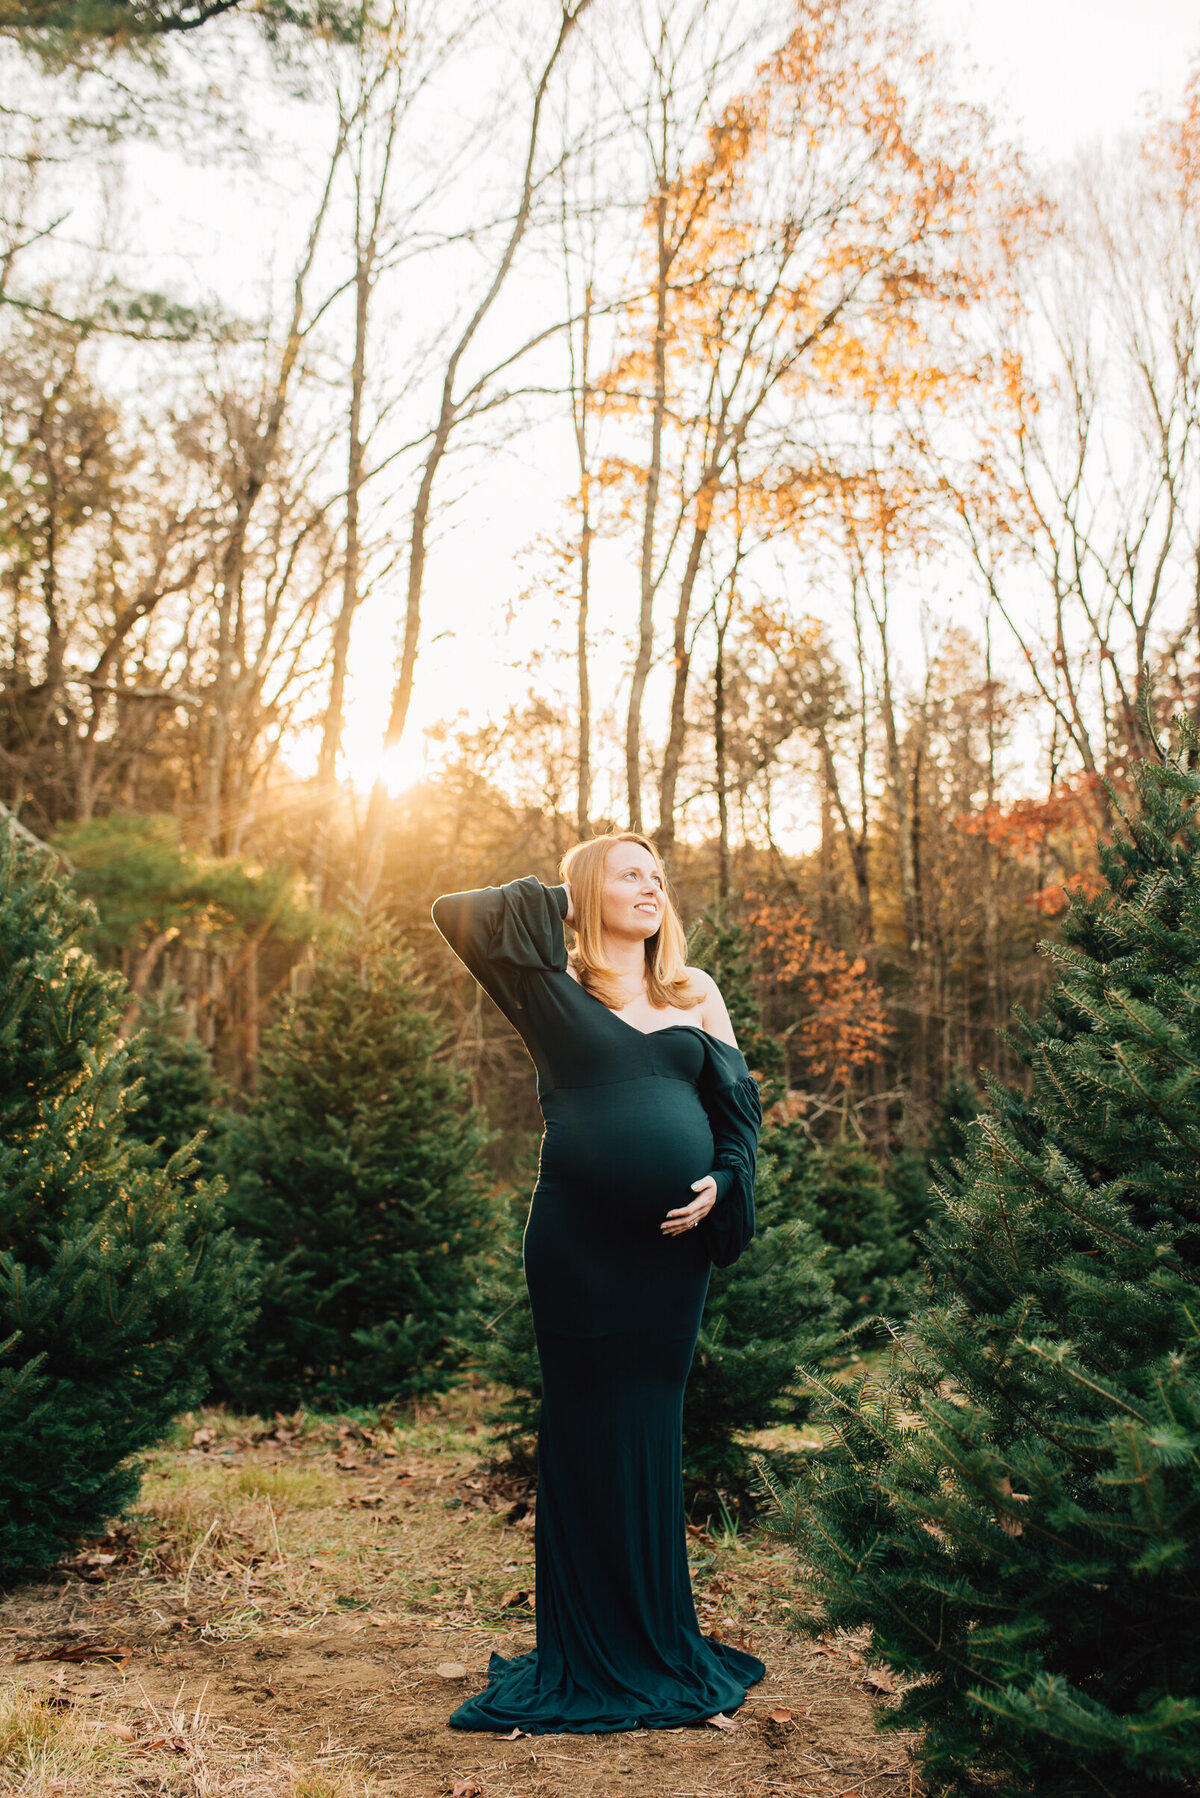 A pregnant mom looking up at the sky with her hand on her belly, wearing a dark green dress at the Christmas Tree Farm.